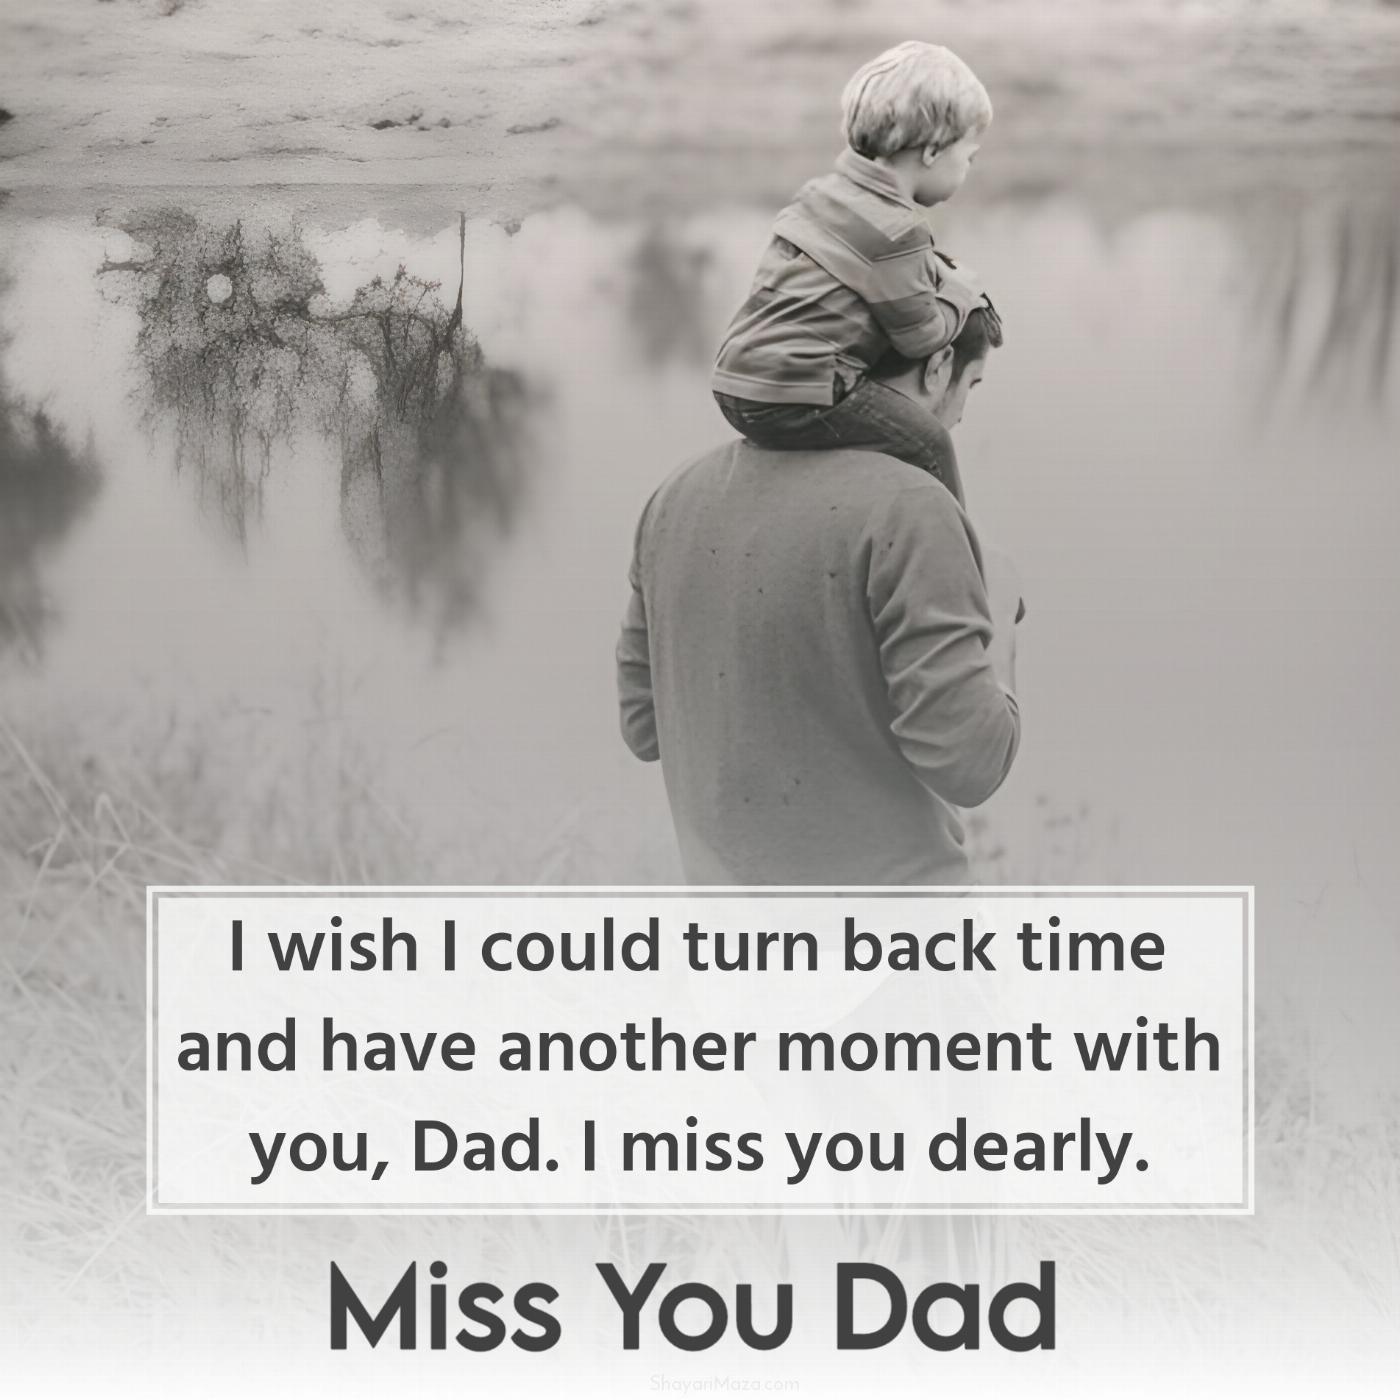 I wish I could turn back time and have another moment with you Dad